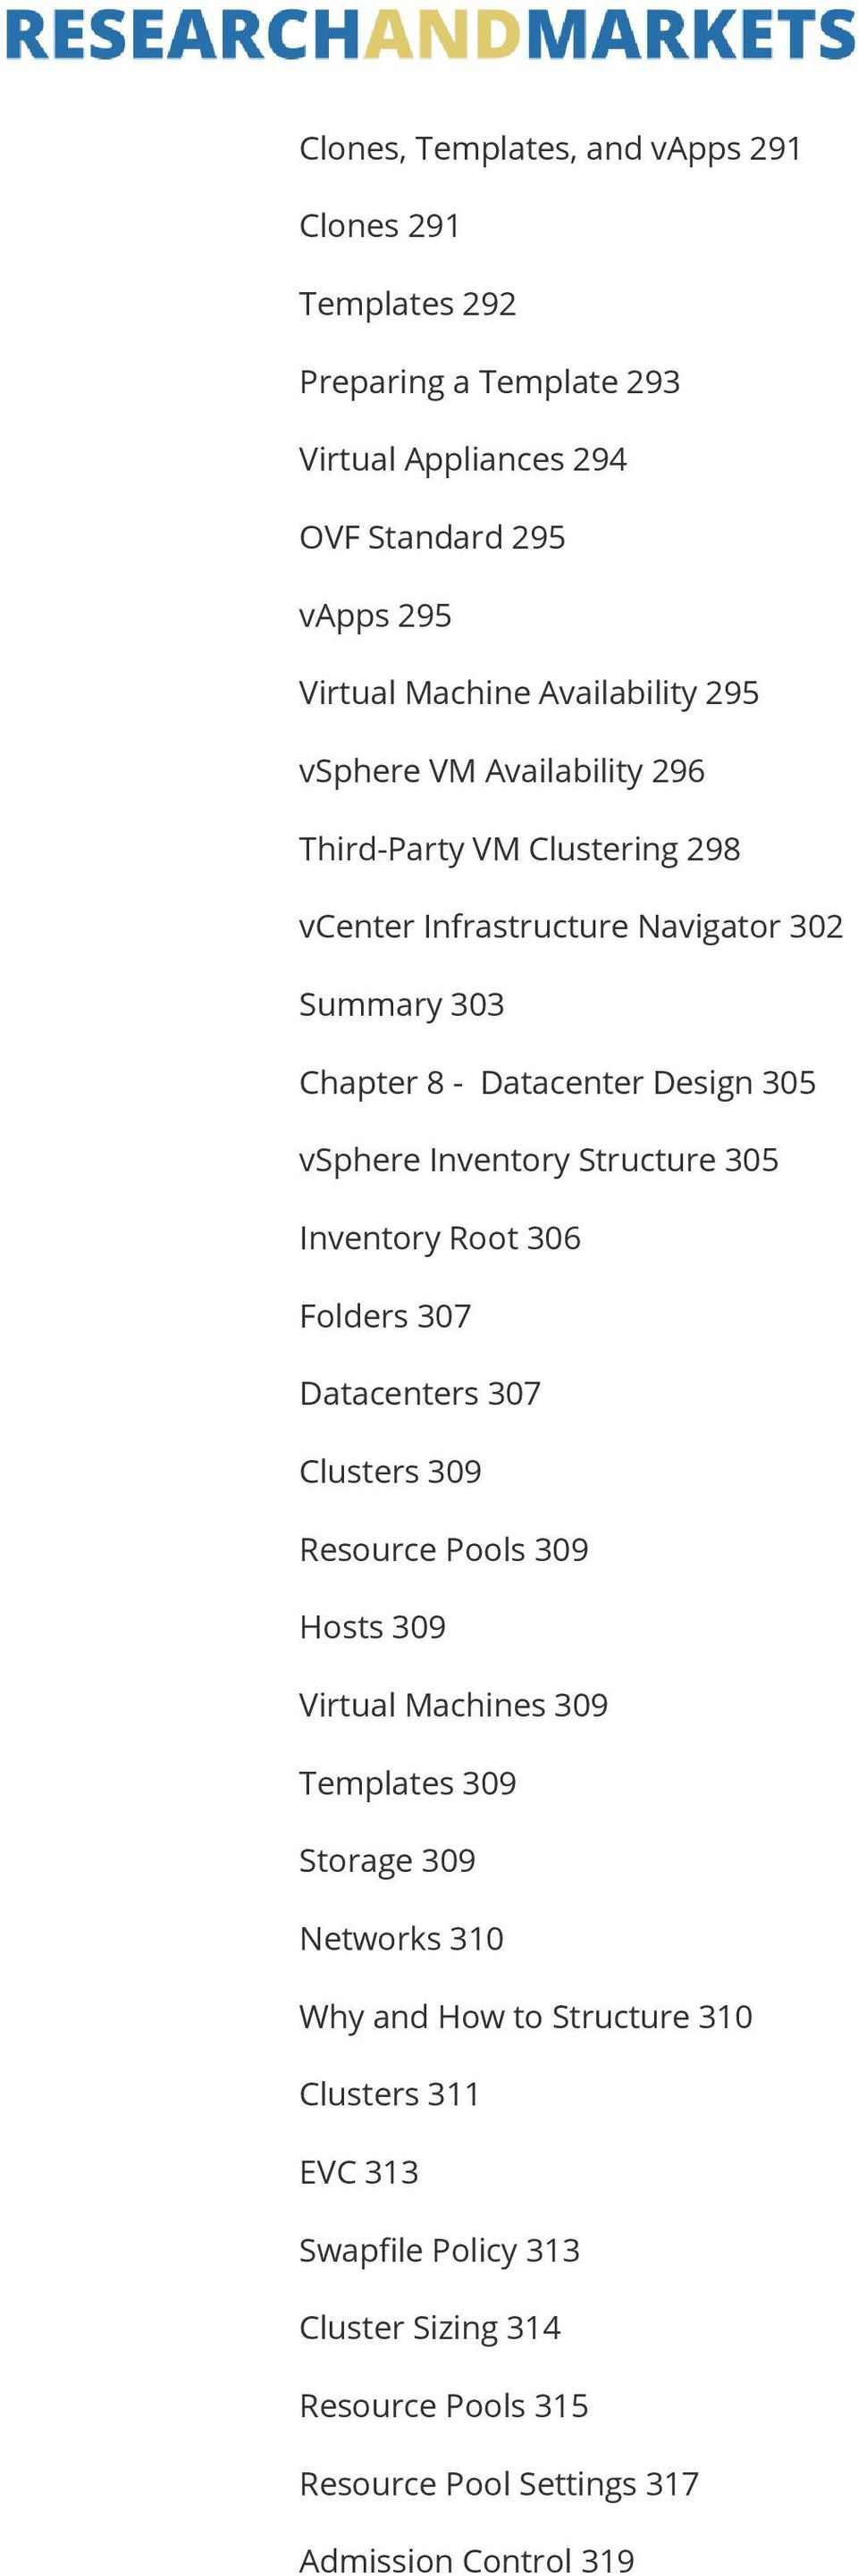 vsphere Inventory Structure 305 Inventory Root 306 Folders 307 Datacenters 307 Clusters 309 Resource Pools 309 Hosts 309 Virtual Machines 309 Templates 309